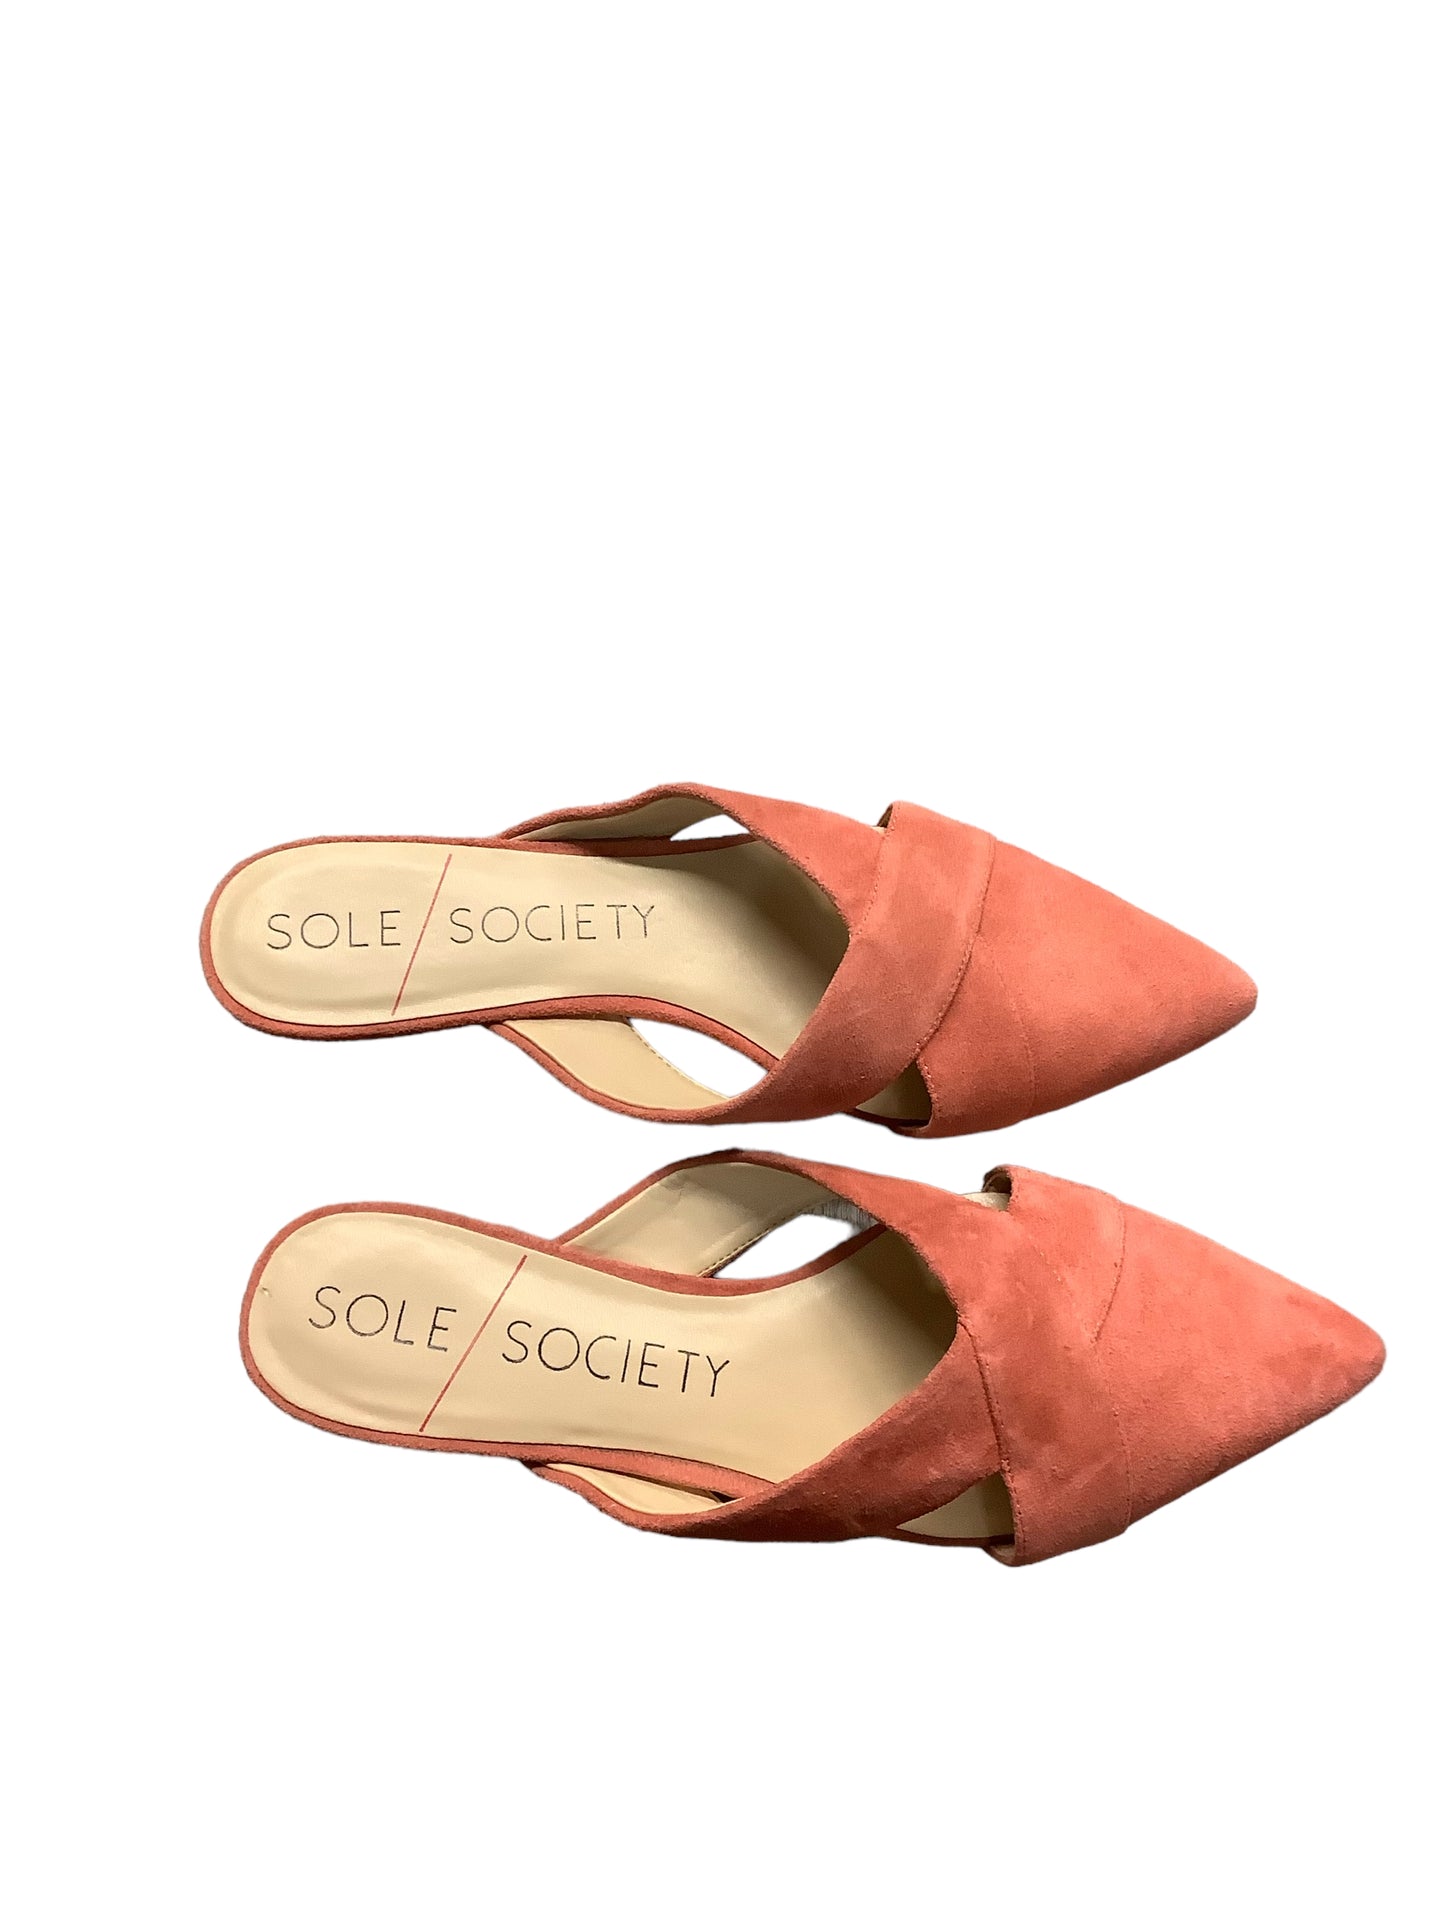 Shoes Flats Mule & Slide By Sole Society  Size: 9.5